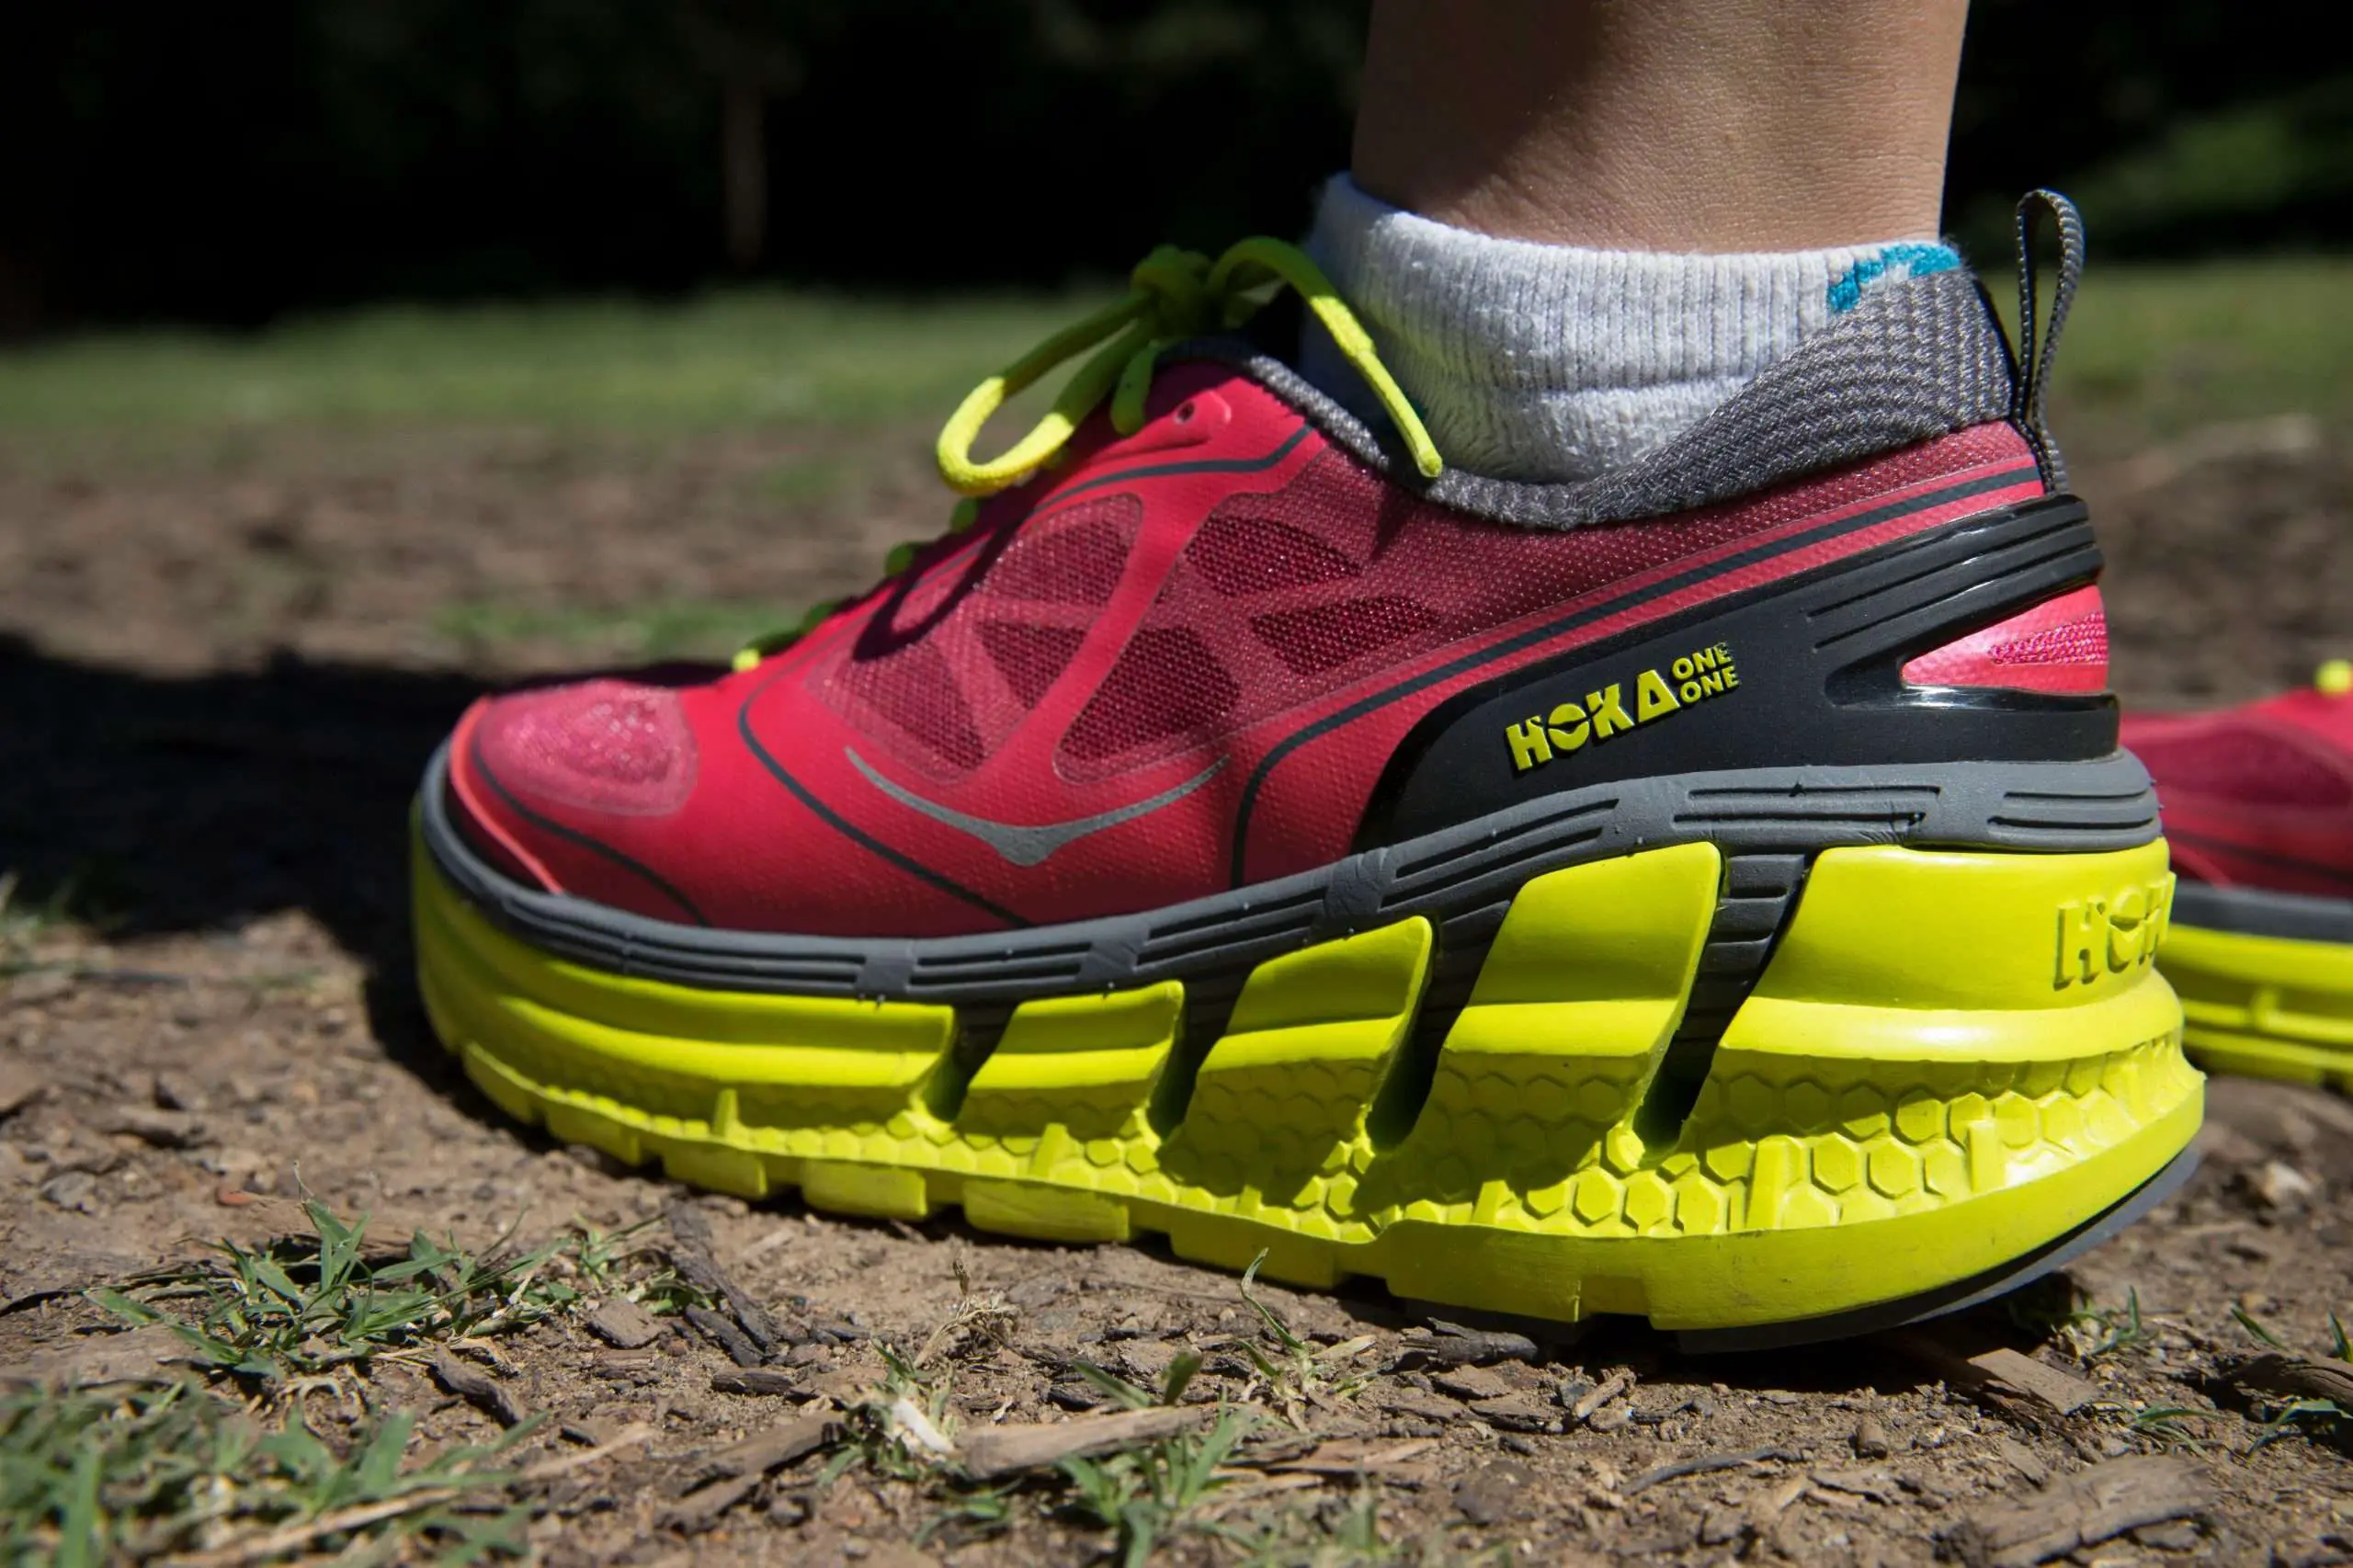 How to pick a better running shoe